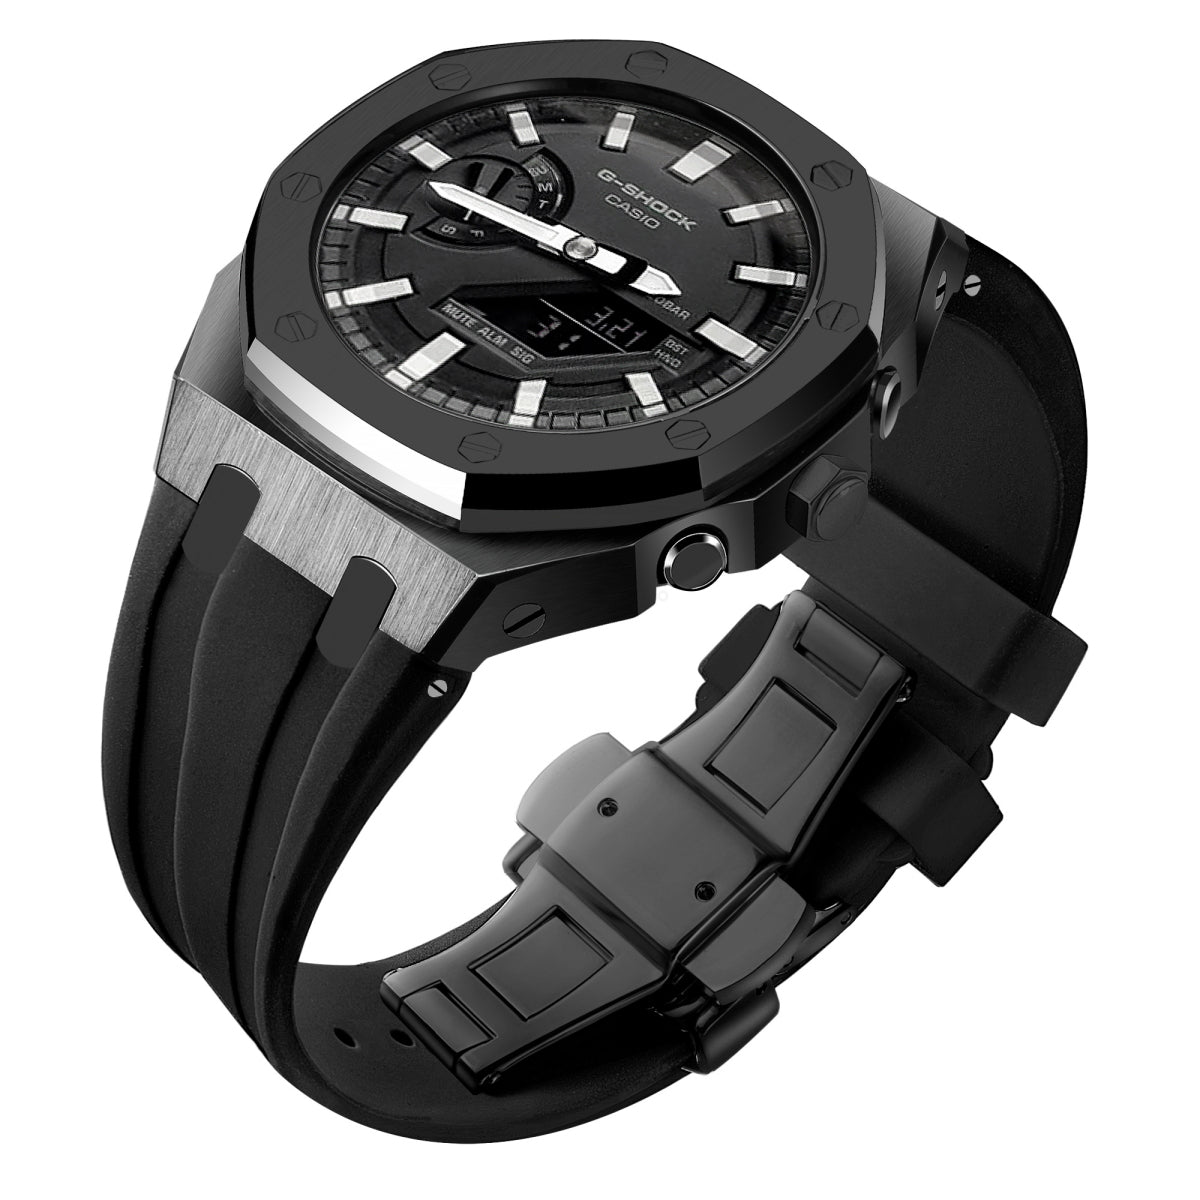 Luxury stainless steel case for G-Shock GA2100【Silicone strap】 - CIVIBUY